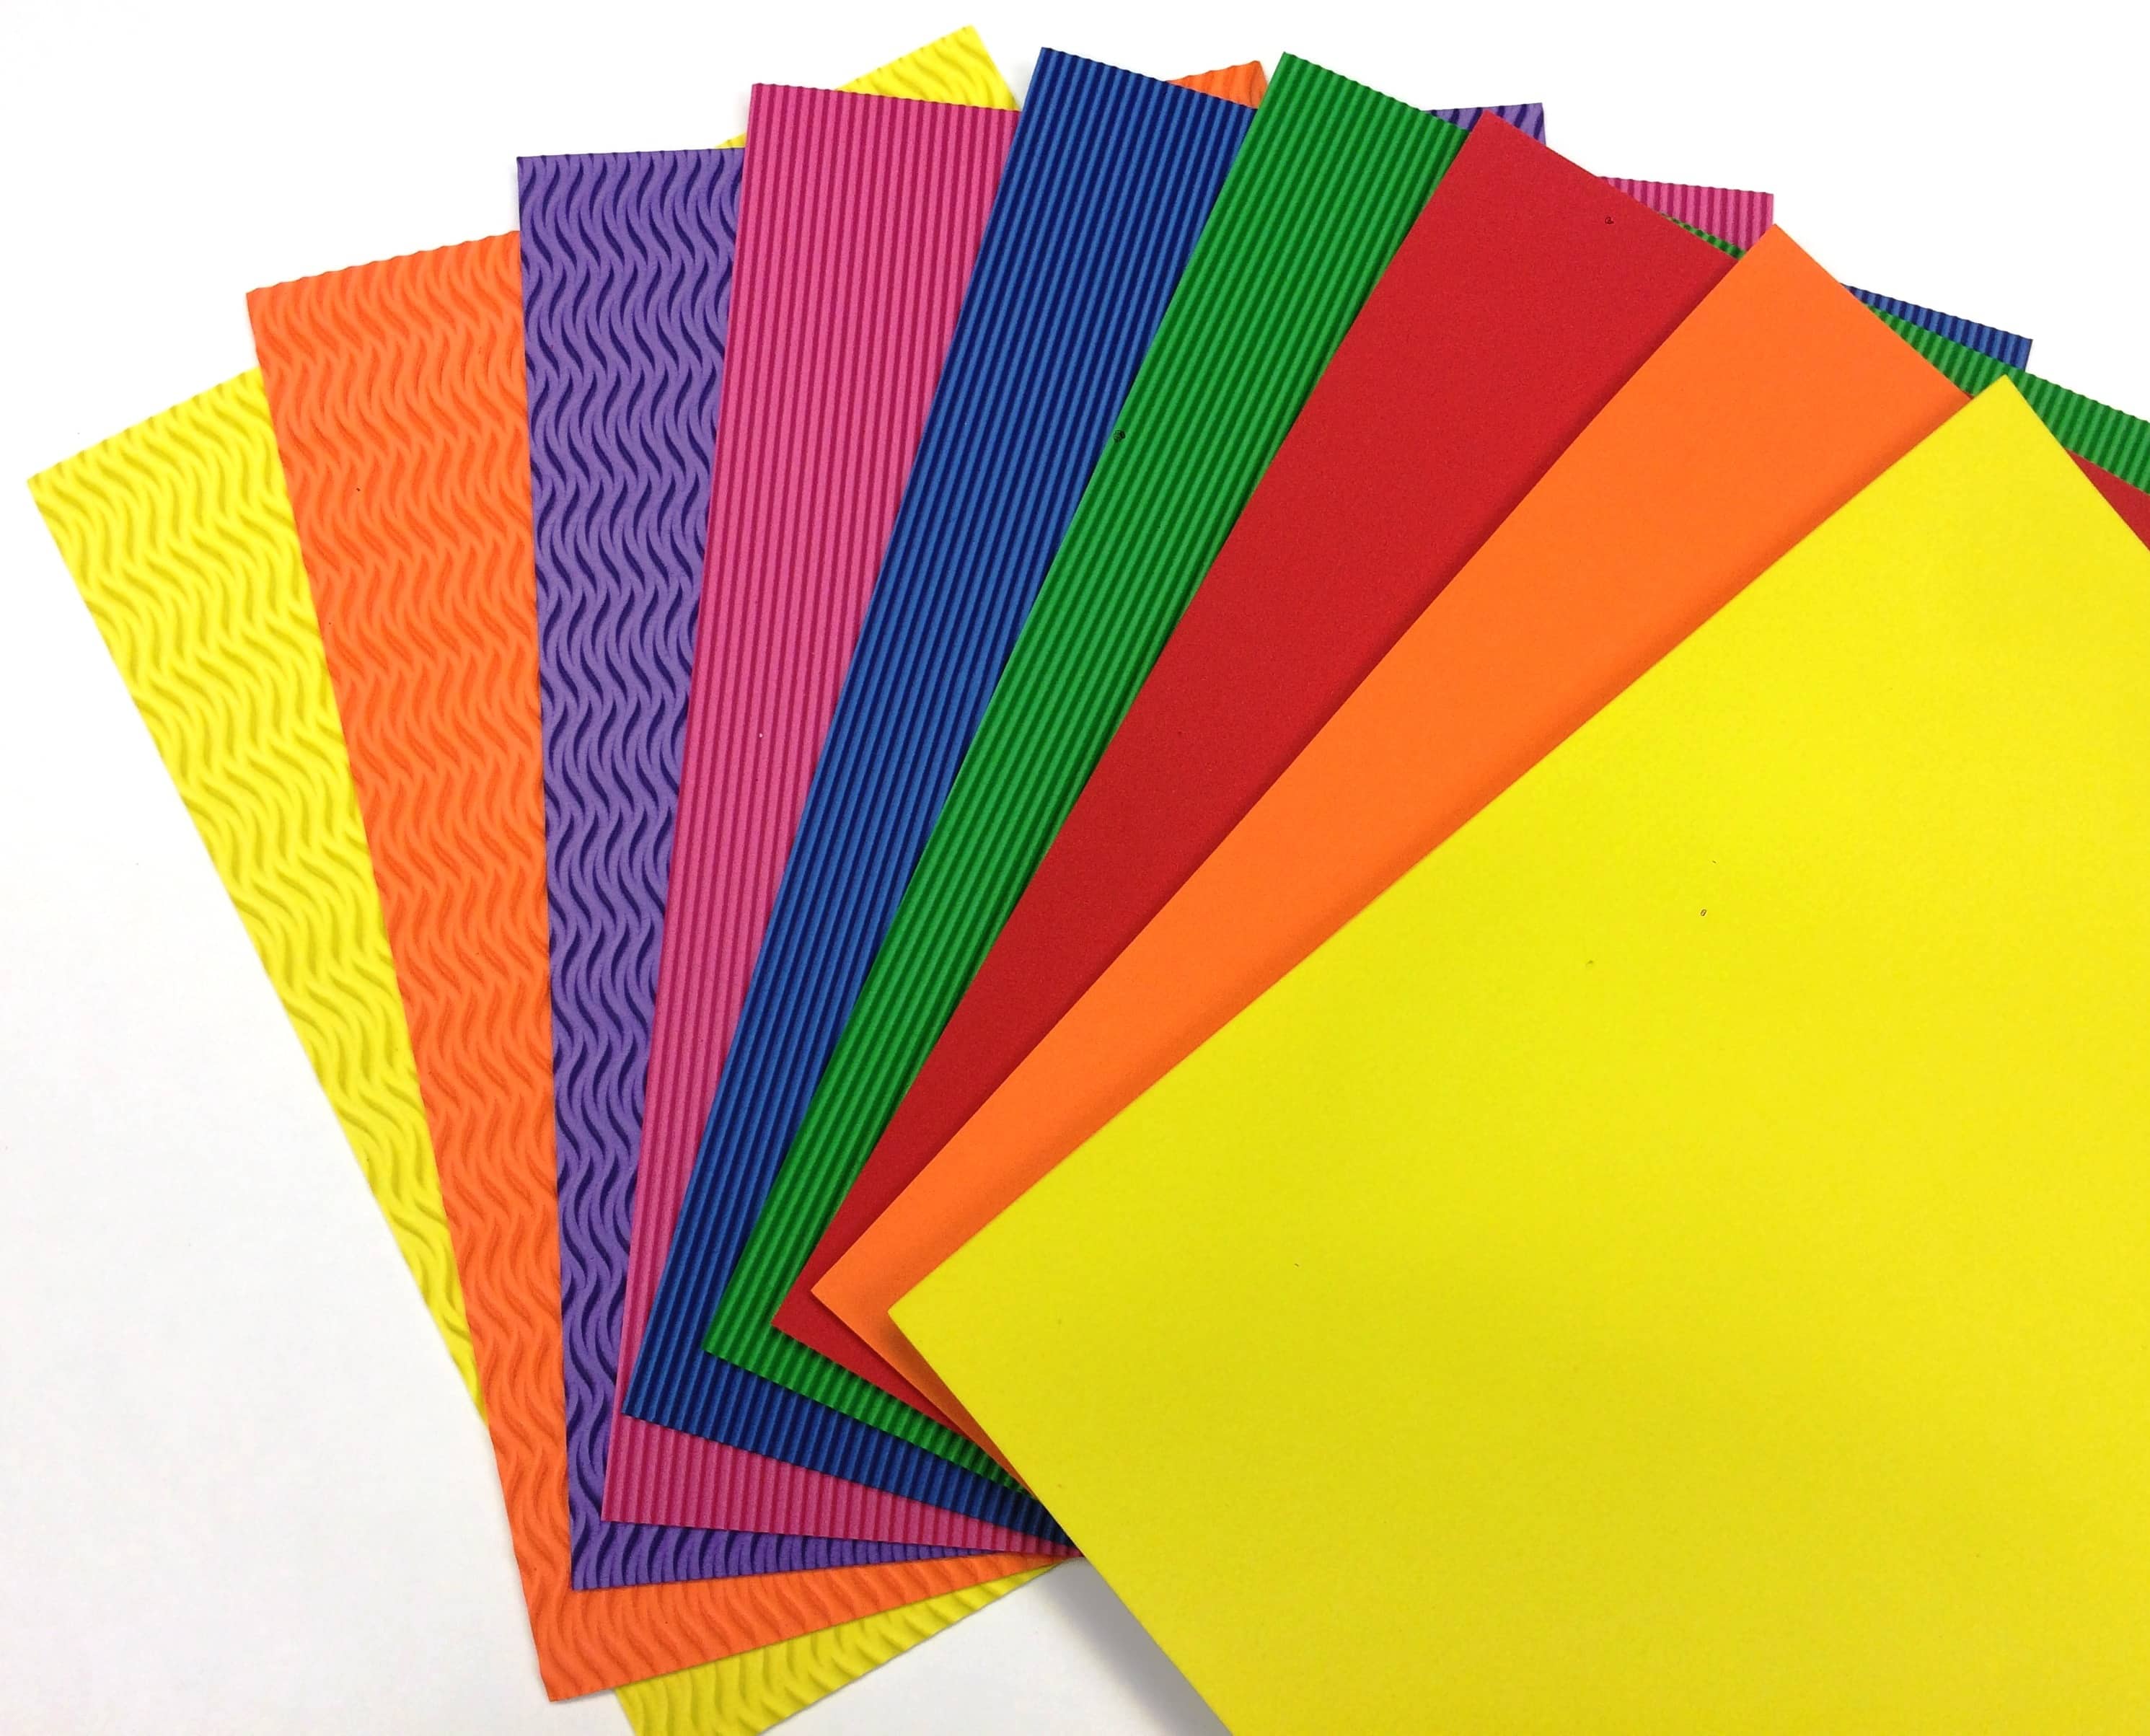 Creativity Street Foam Sheets 12 x 18 Pack Of 10 Assorted Colors